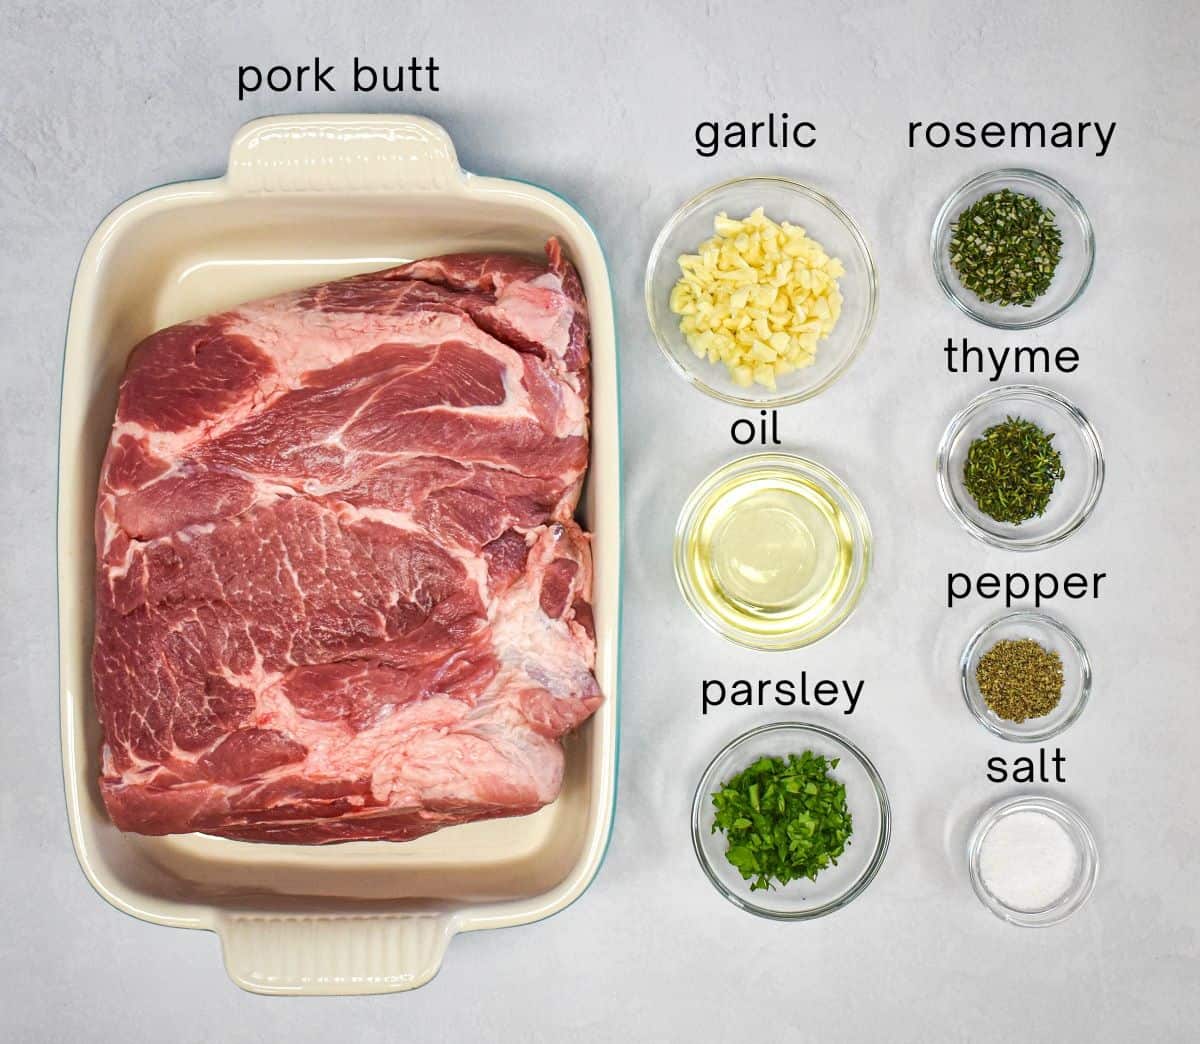 The ingredients for the easy oven roasted pork butt with garlic and herbs prepped and arranged on a white table with each one labeled with small, black letters.